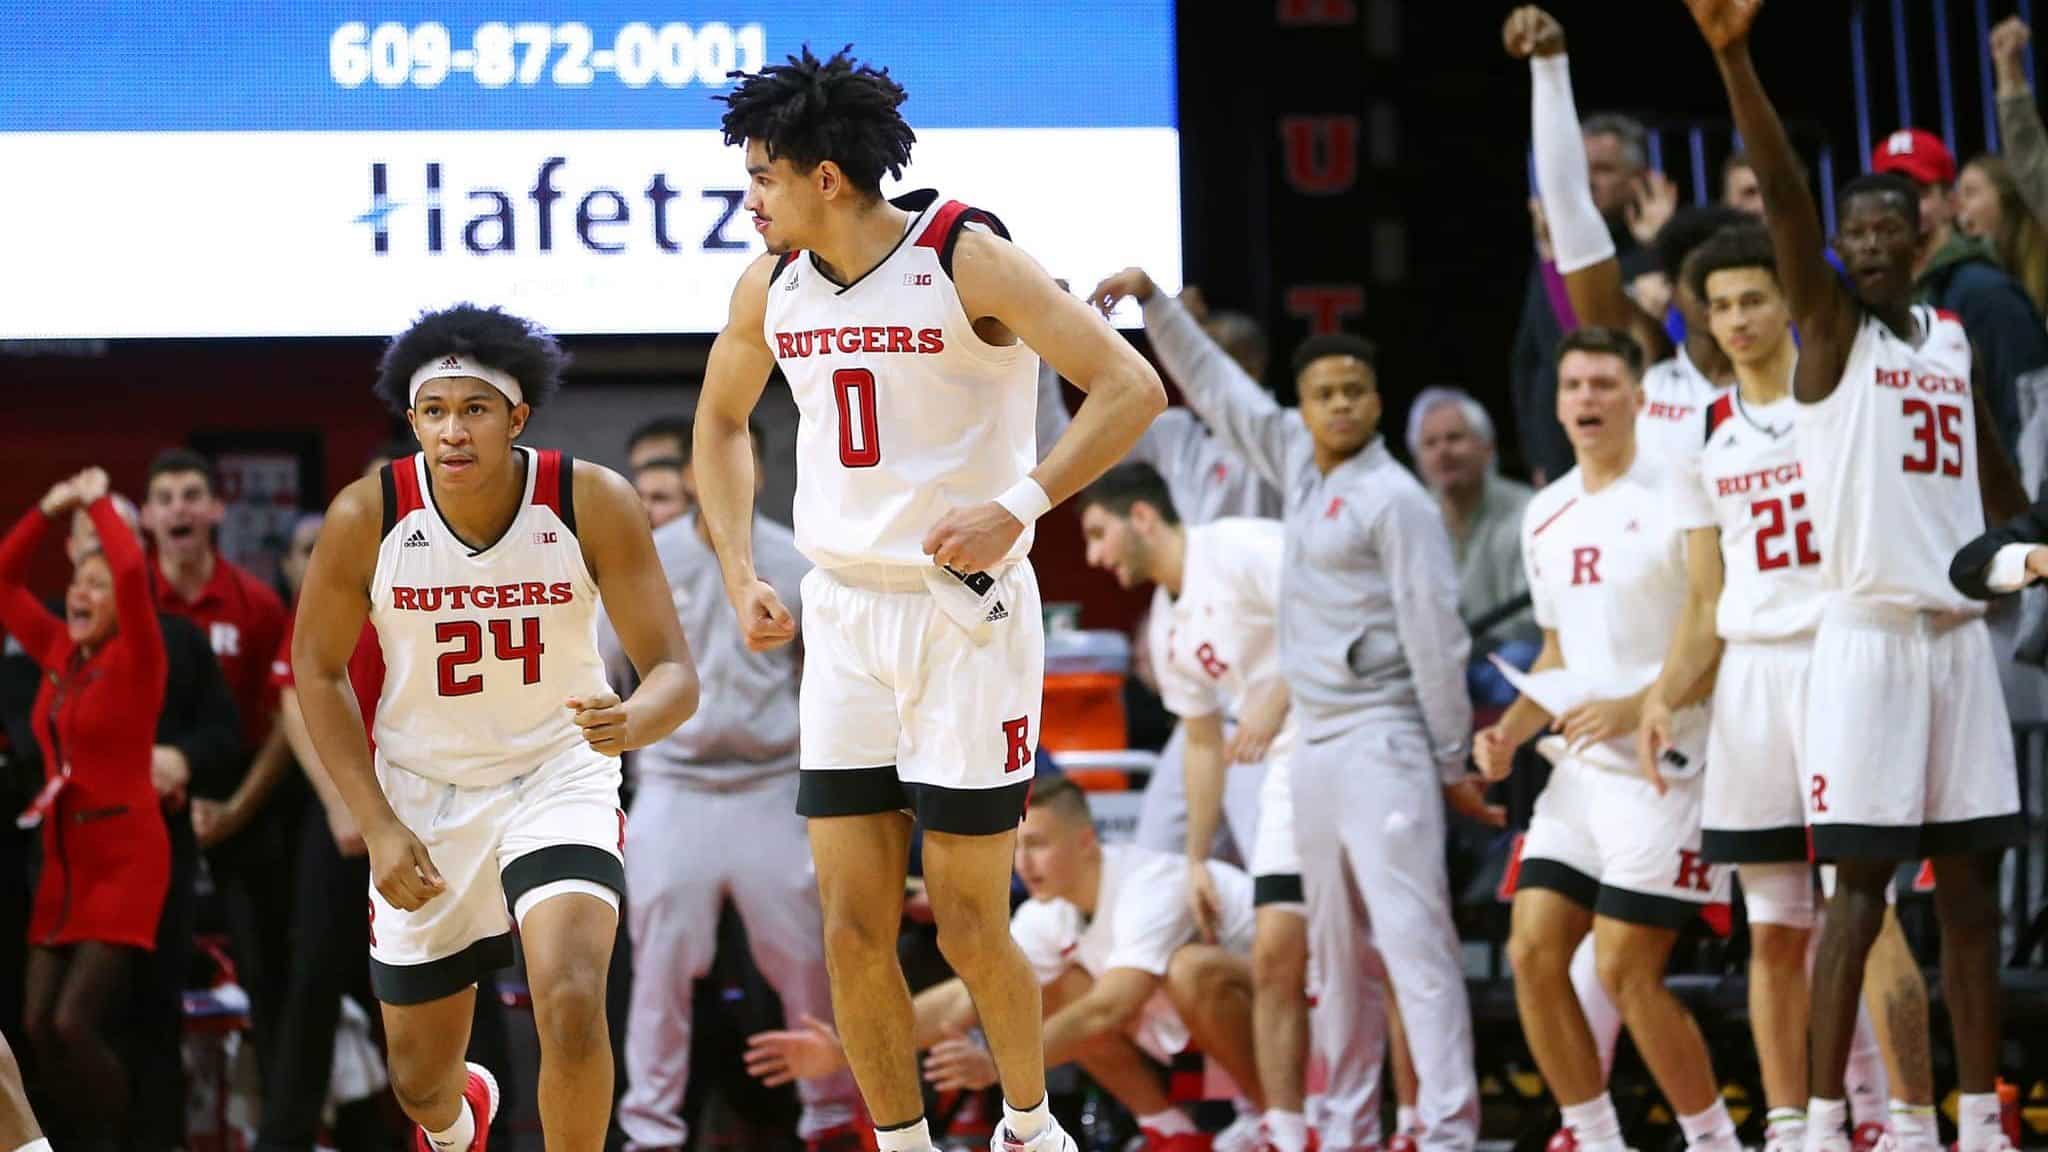 PISCATAWAY, NJ - JANUARY 09: Geo Baker #0 of the Rutgers Scarlet Knights reacts after scoring the game winning three-point basket defeating the Ohio State Buckeyes 64-61 in a game at Rutgers Athletic Center on January 9, 2019 in Piscataway, New Jersey.